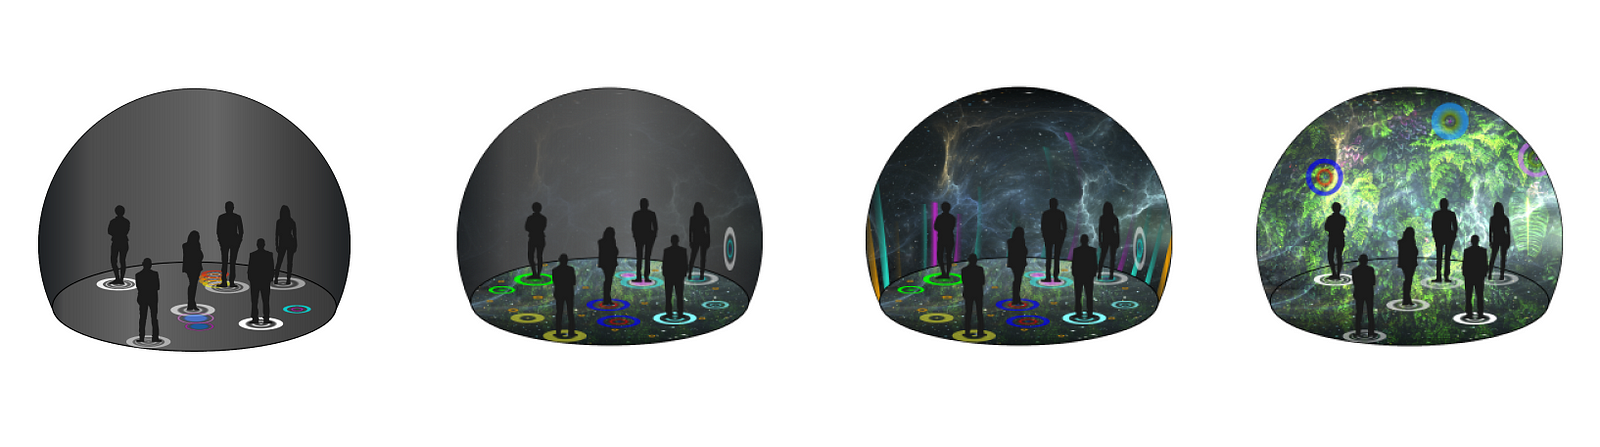 Four dome sketches with silhouettes of people standing inside the dome with different projections on the background